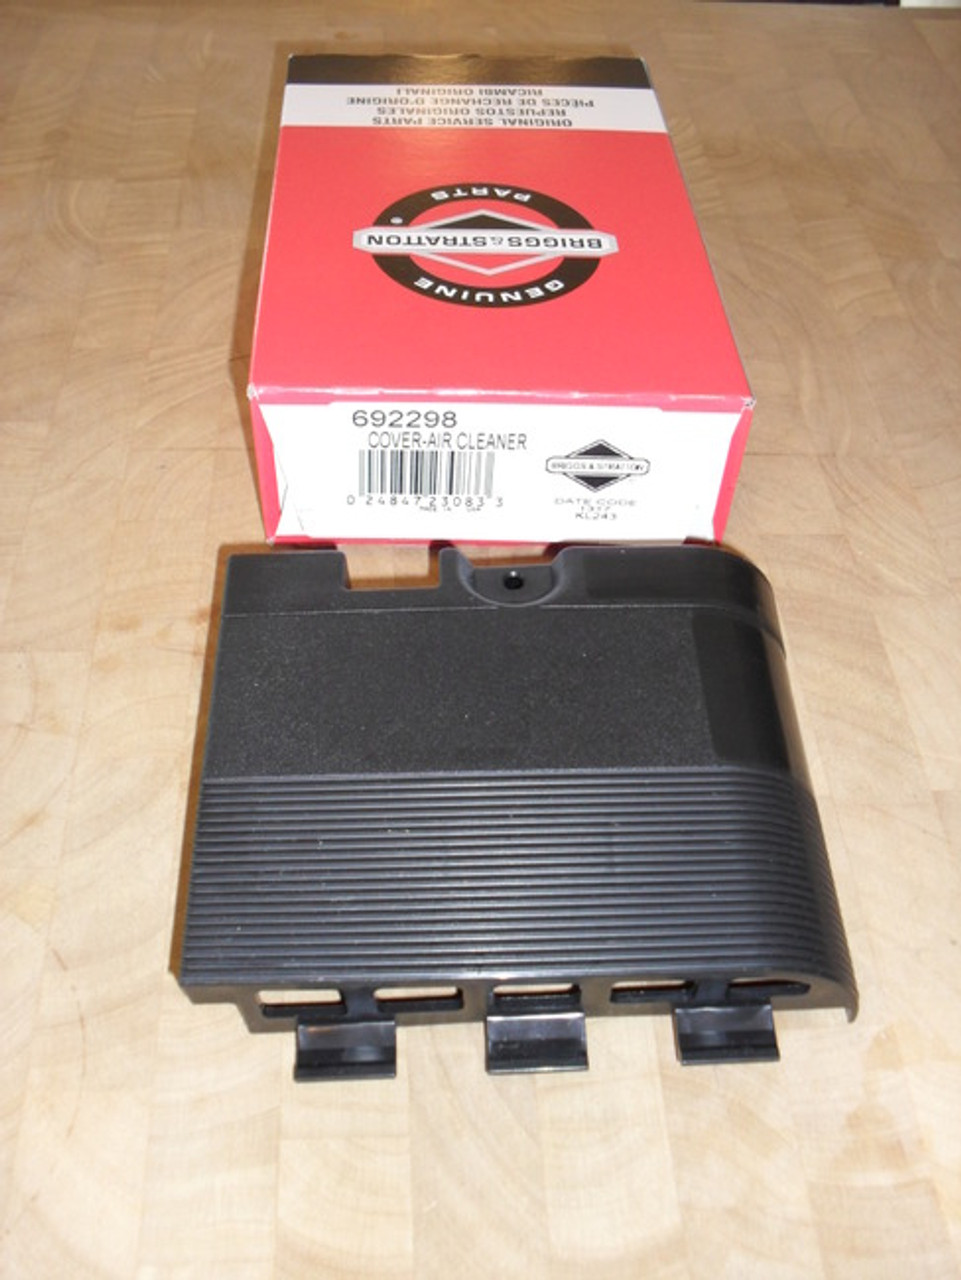 Air Filter Cover for Briggs & Stratton Quantum 692298, 5 to 6.75 HP &